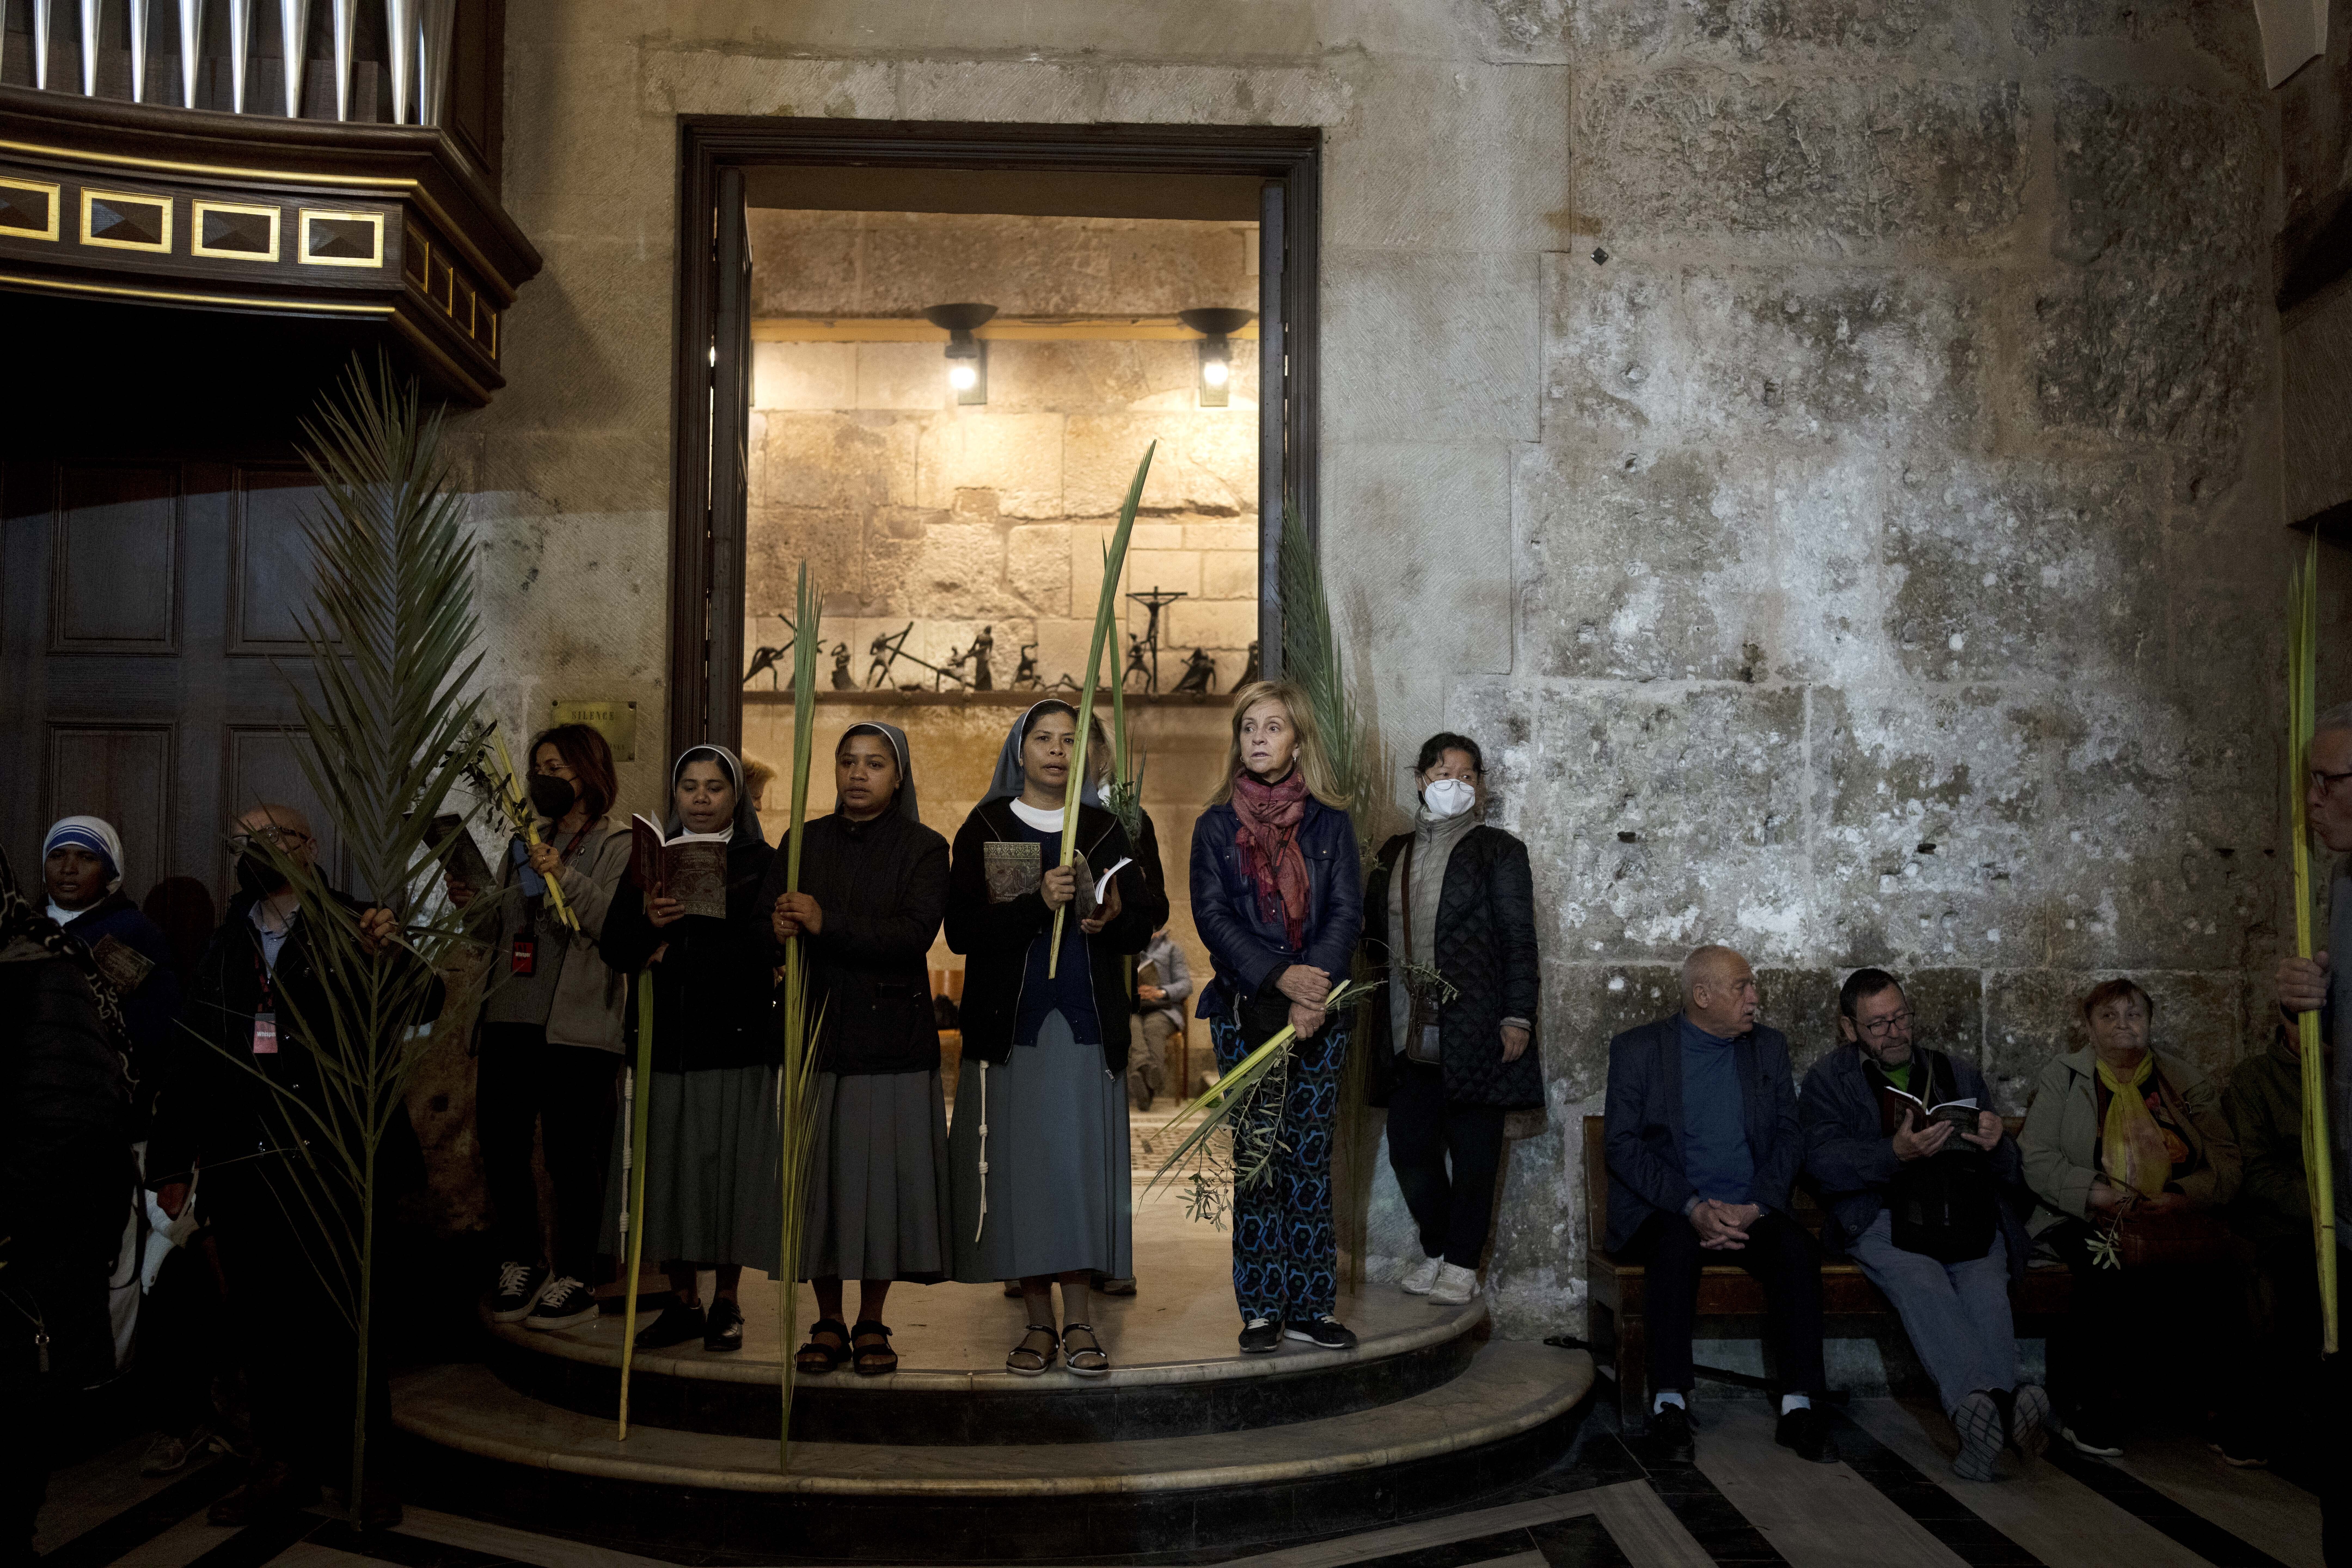 Christians take part in Palm Sunday Mass in the Church of the Holy Sepulchre